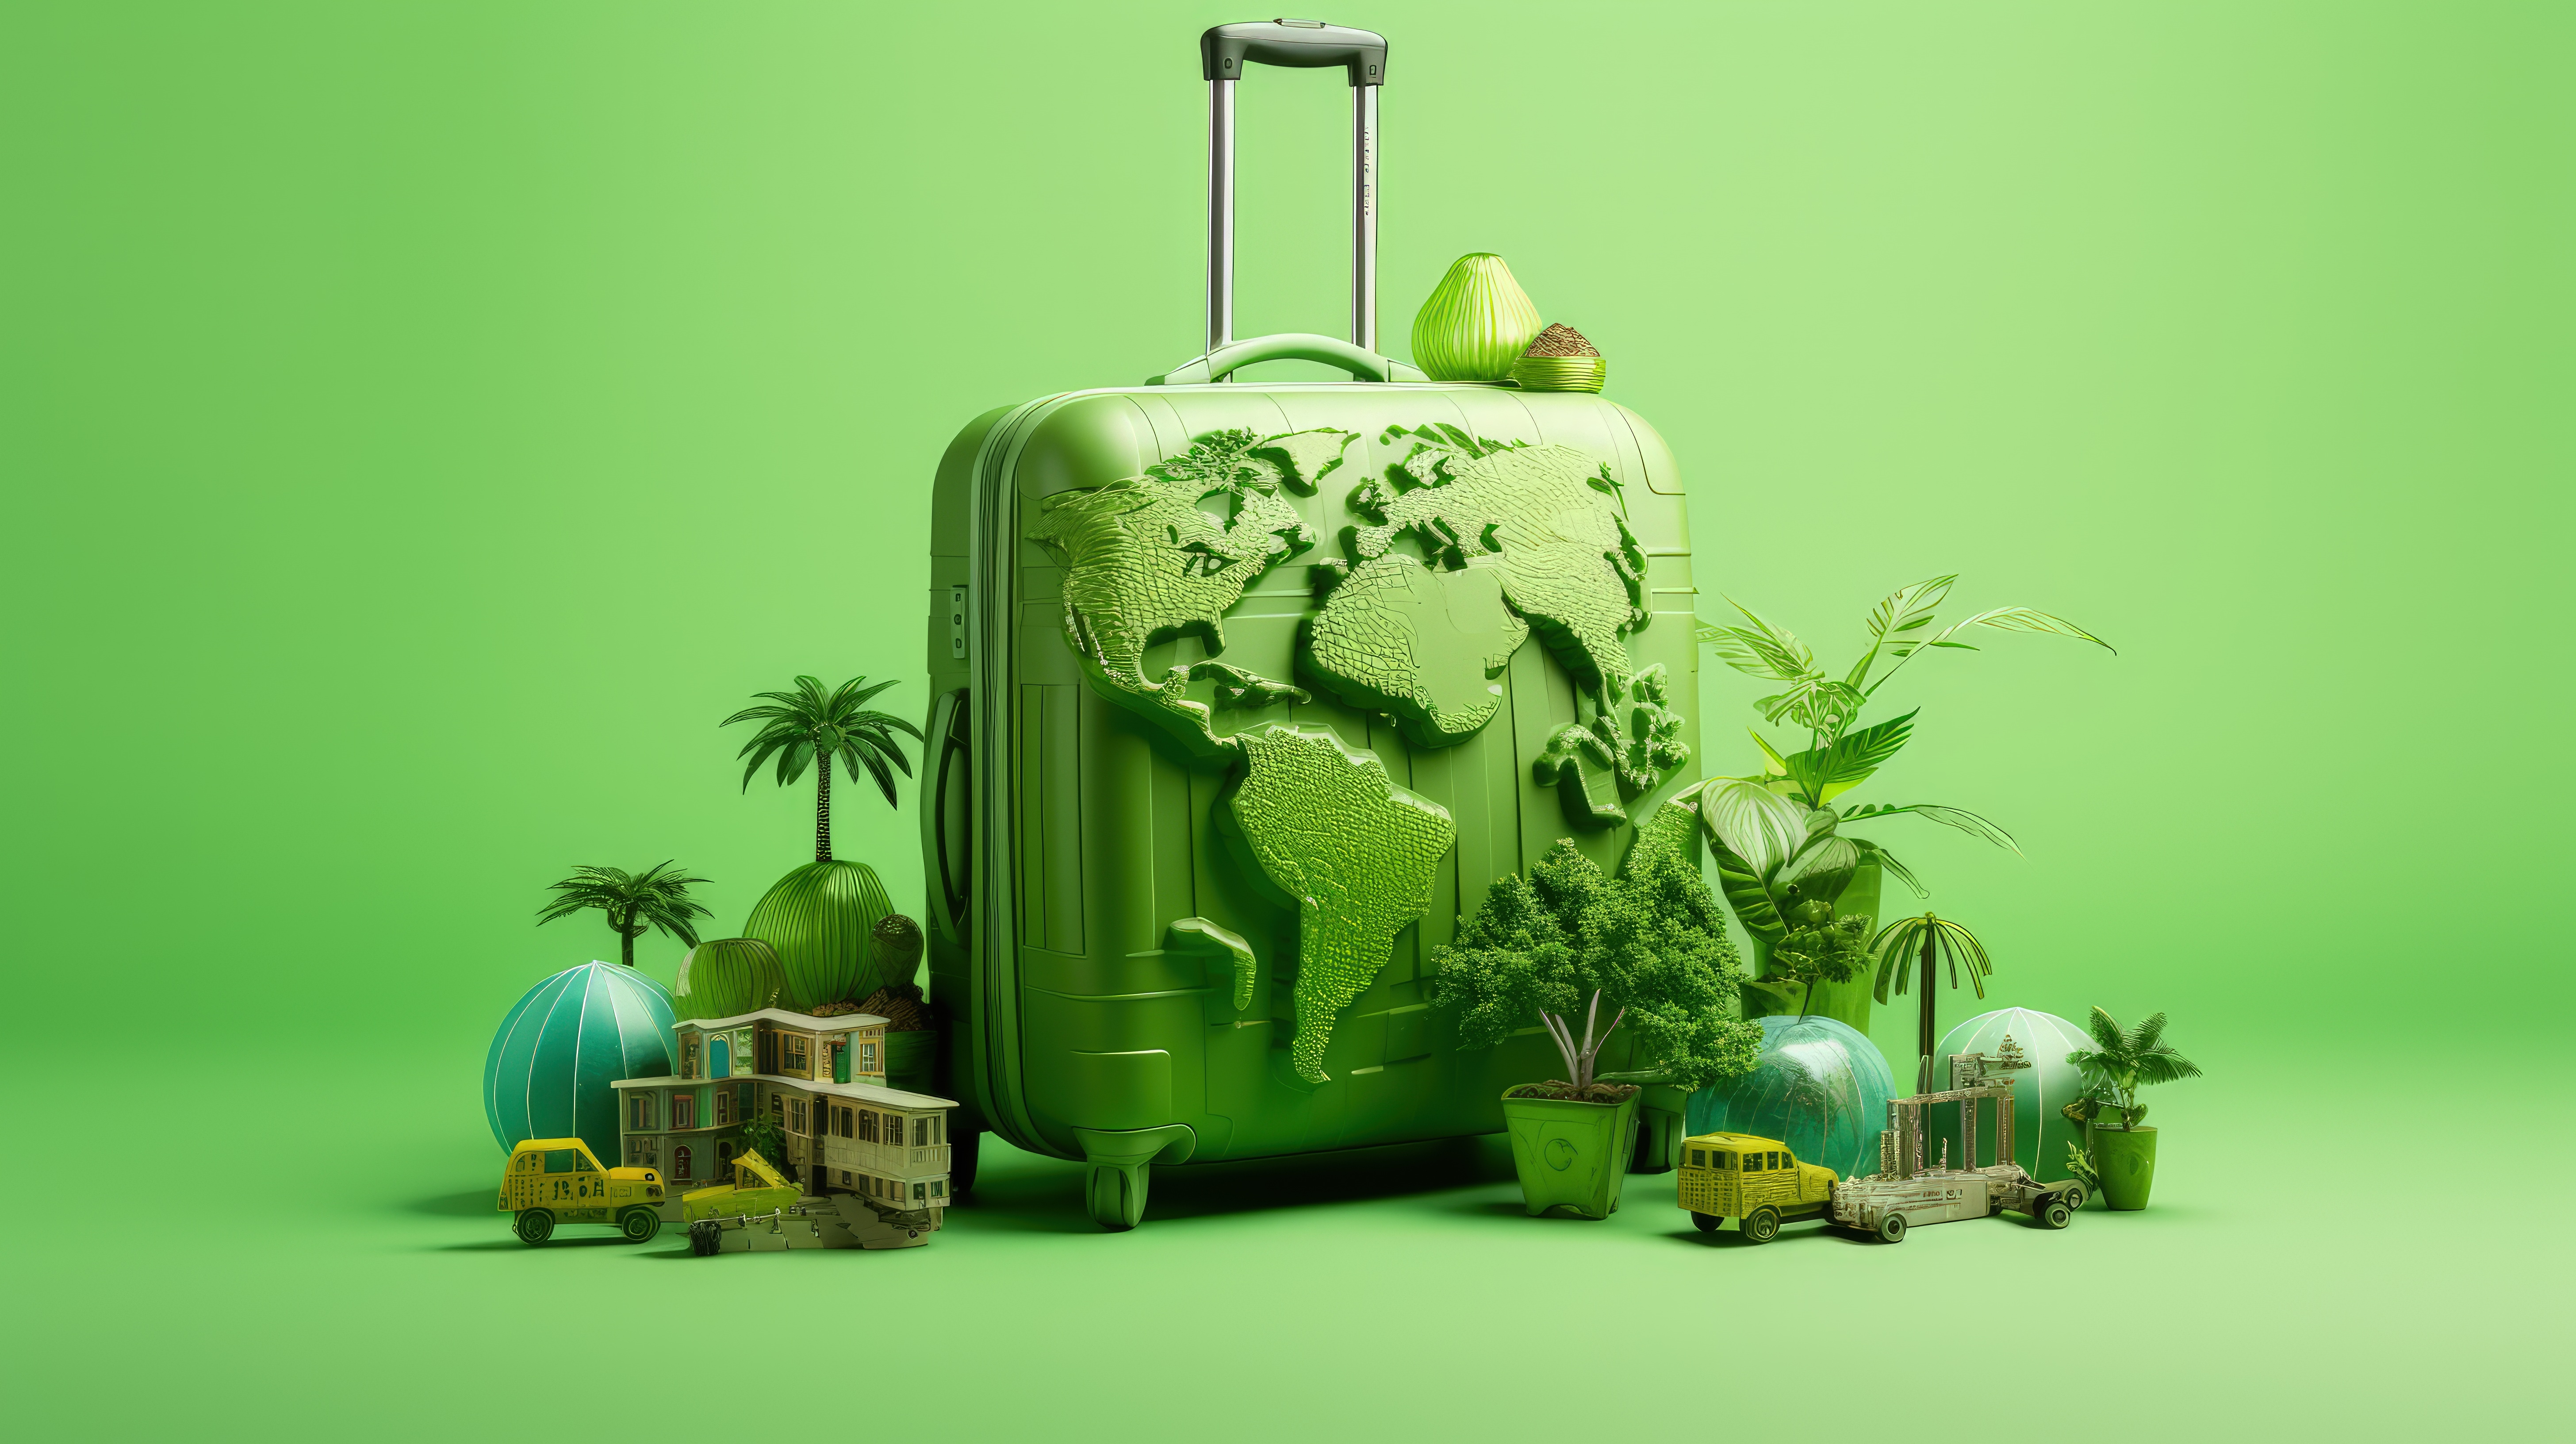 Green suitcase embossed with world map, surrounded by miniature palm trees, buildings, and a globe.